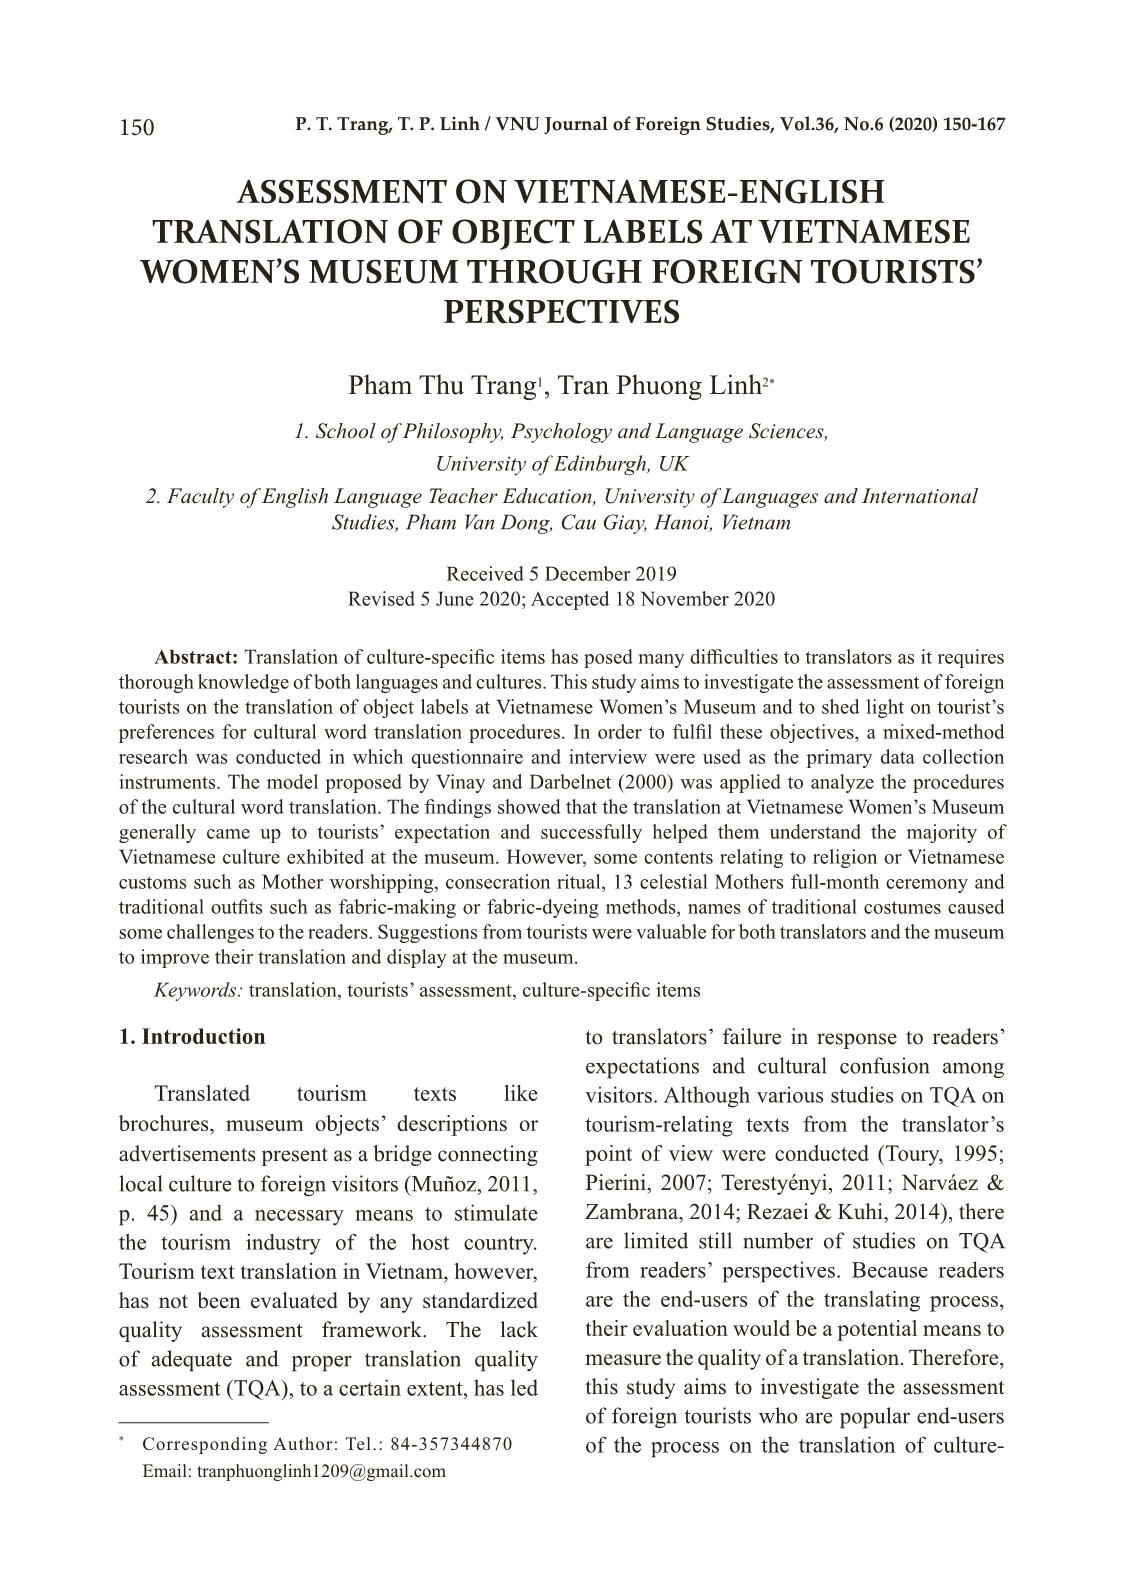 Assessment on Vietnamese-English translation of object labels at Vietnamese women’s museum through foreign tourists’ perspectives trang 1